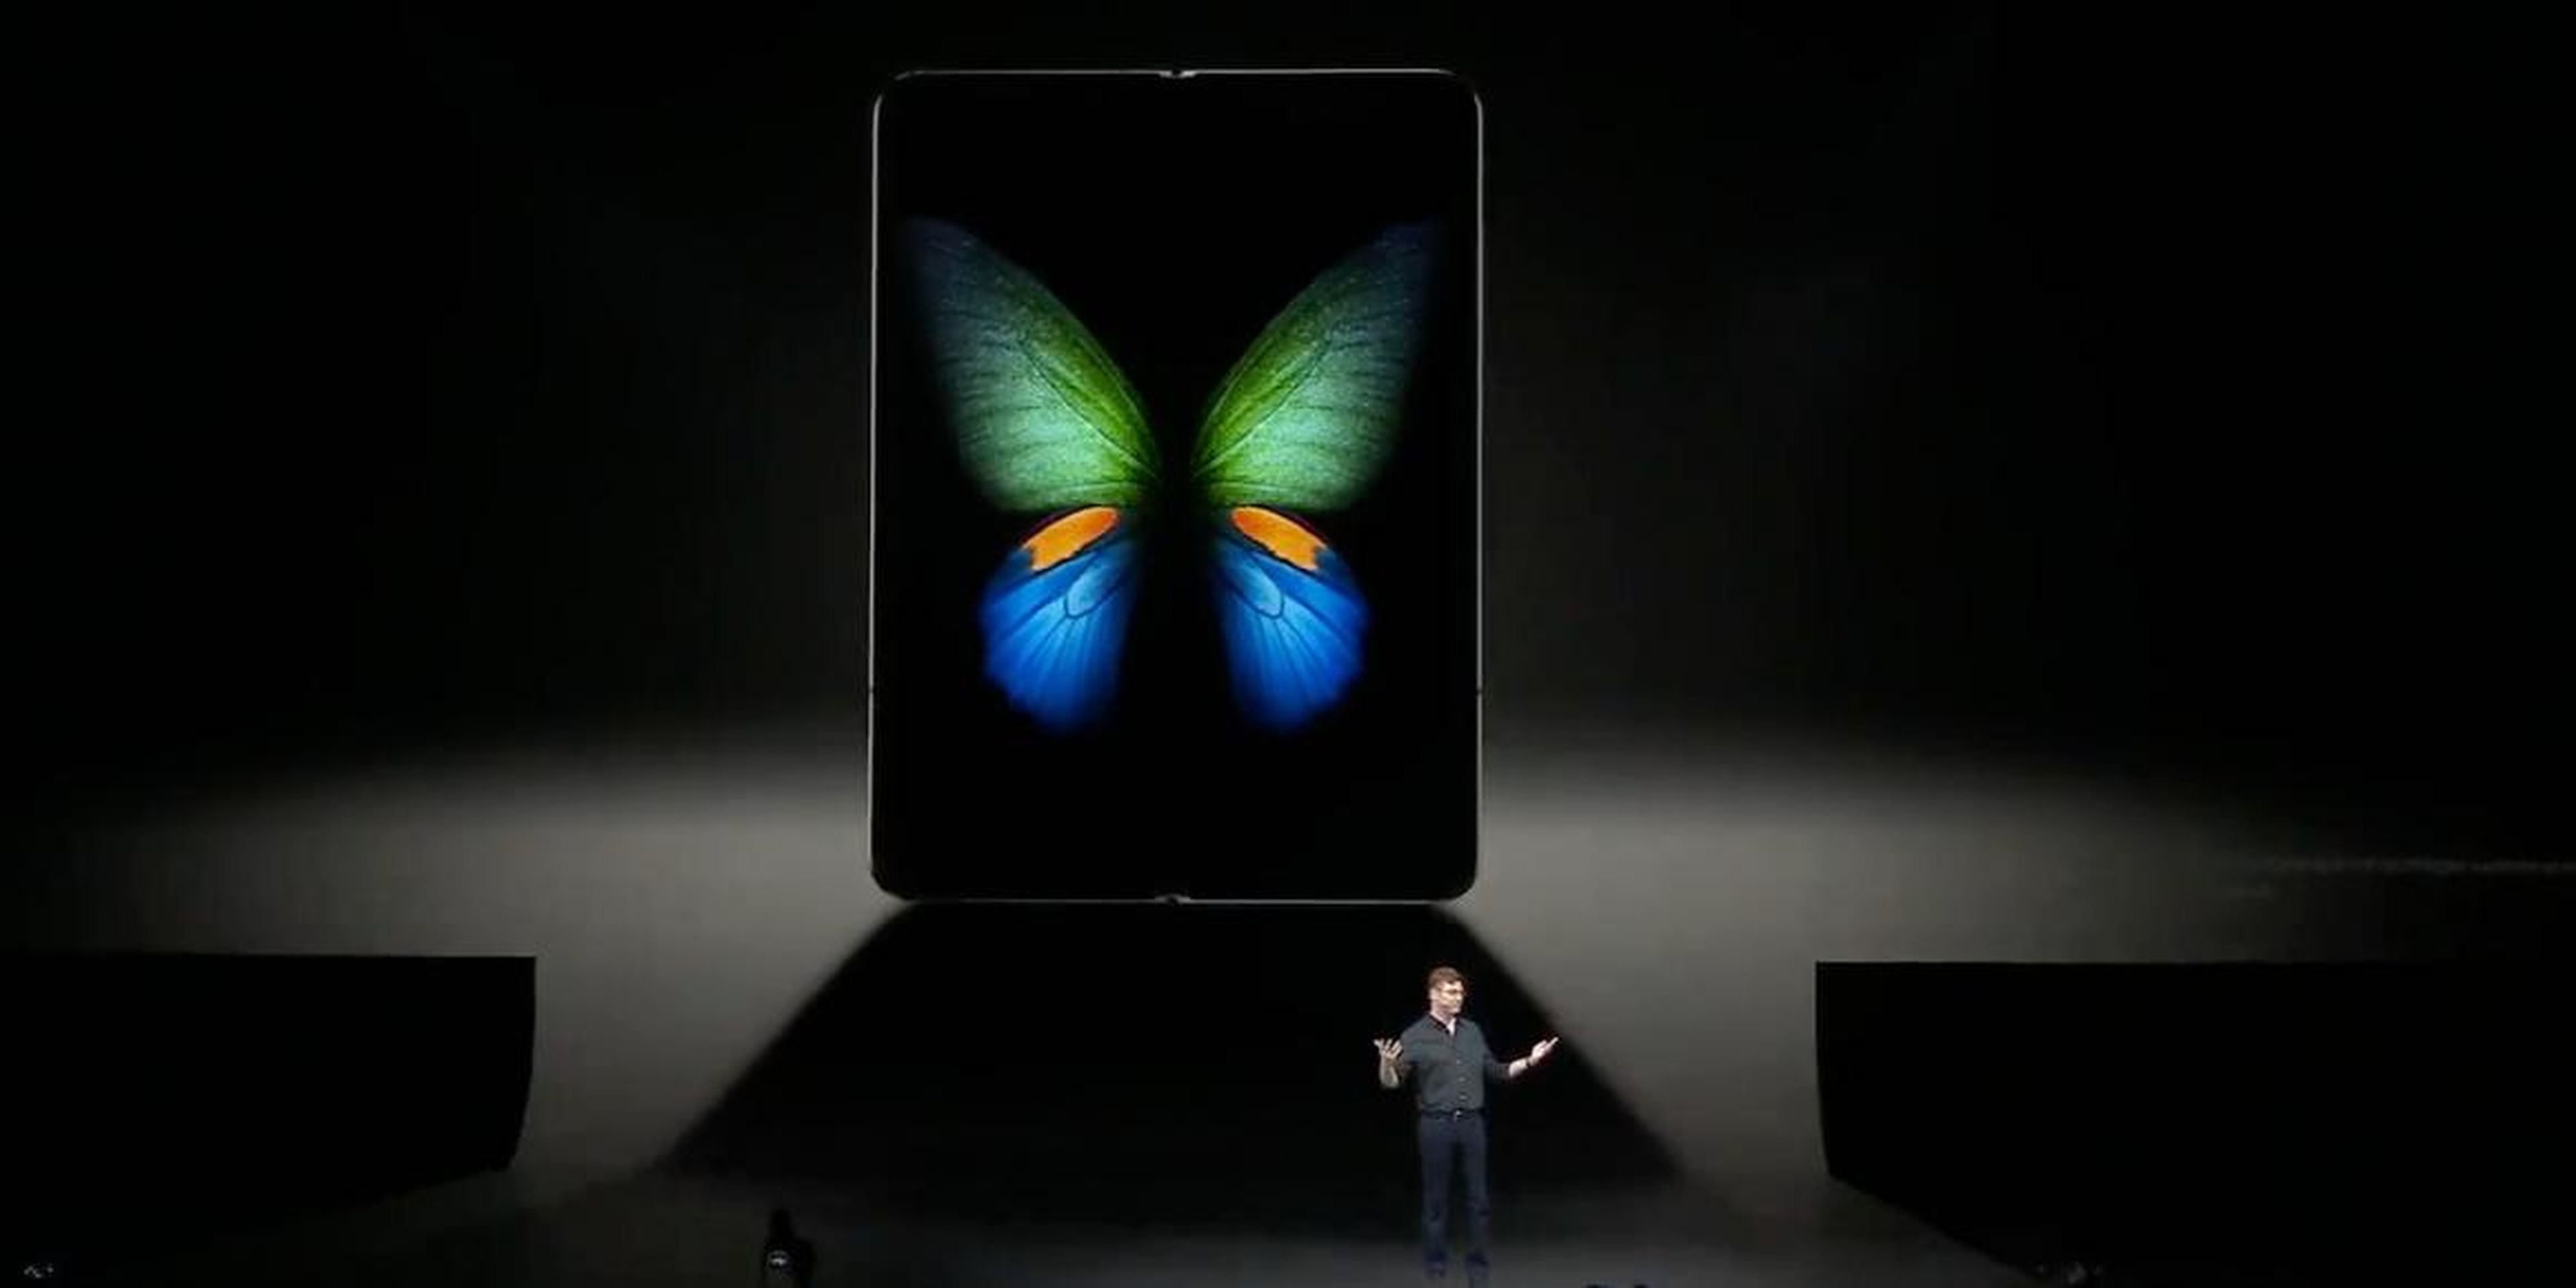 Samsung has introduced its foldable smartphone, called the Galaxy Fold.